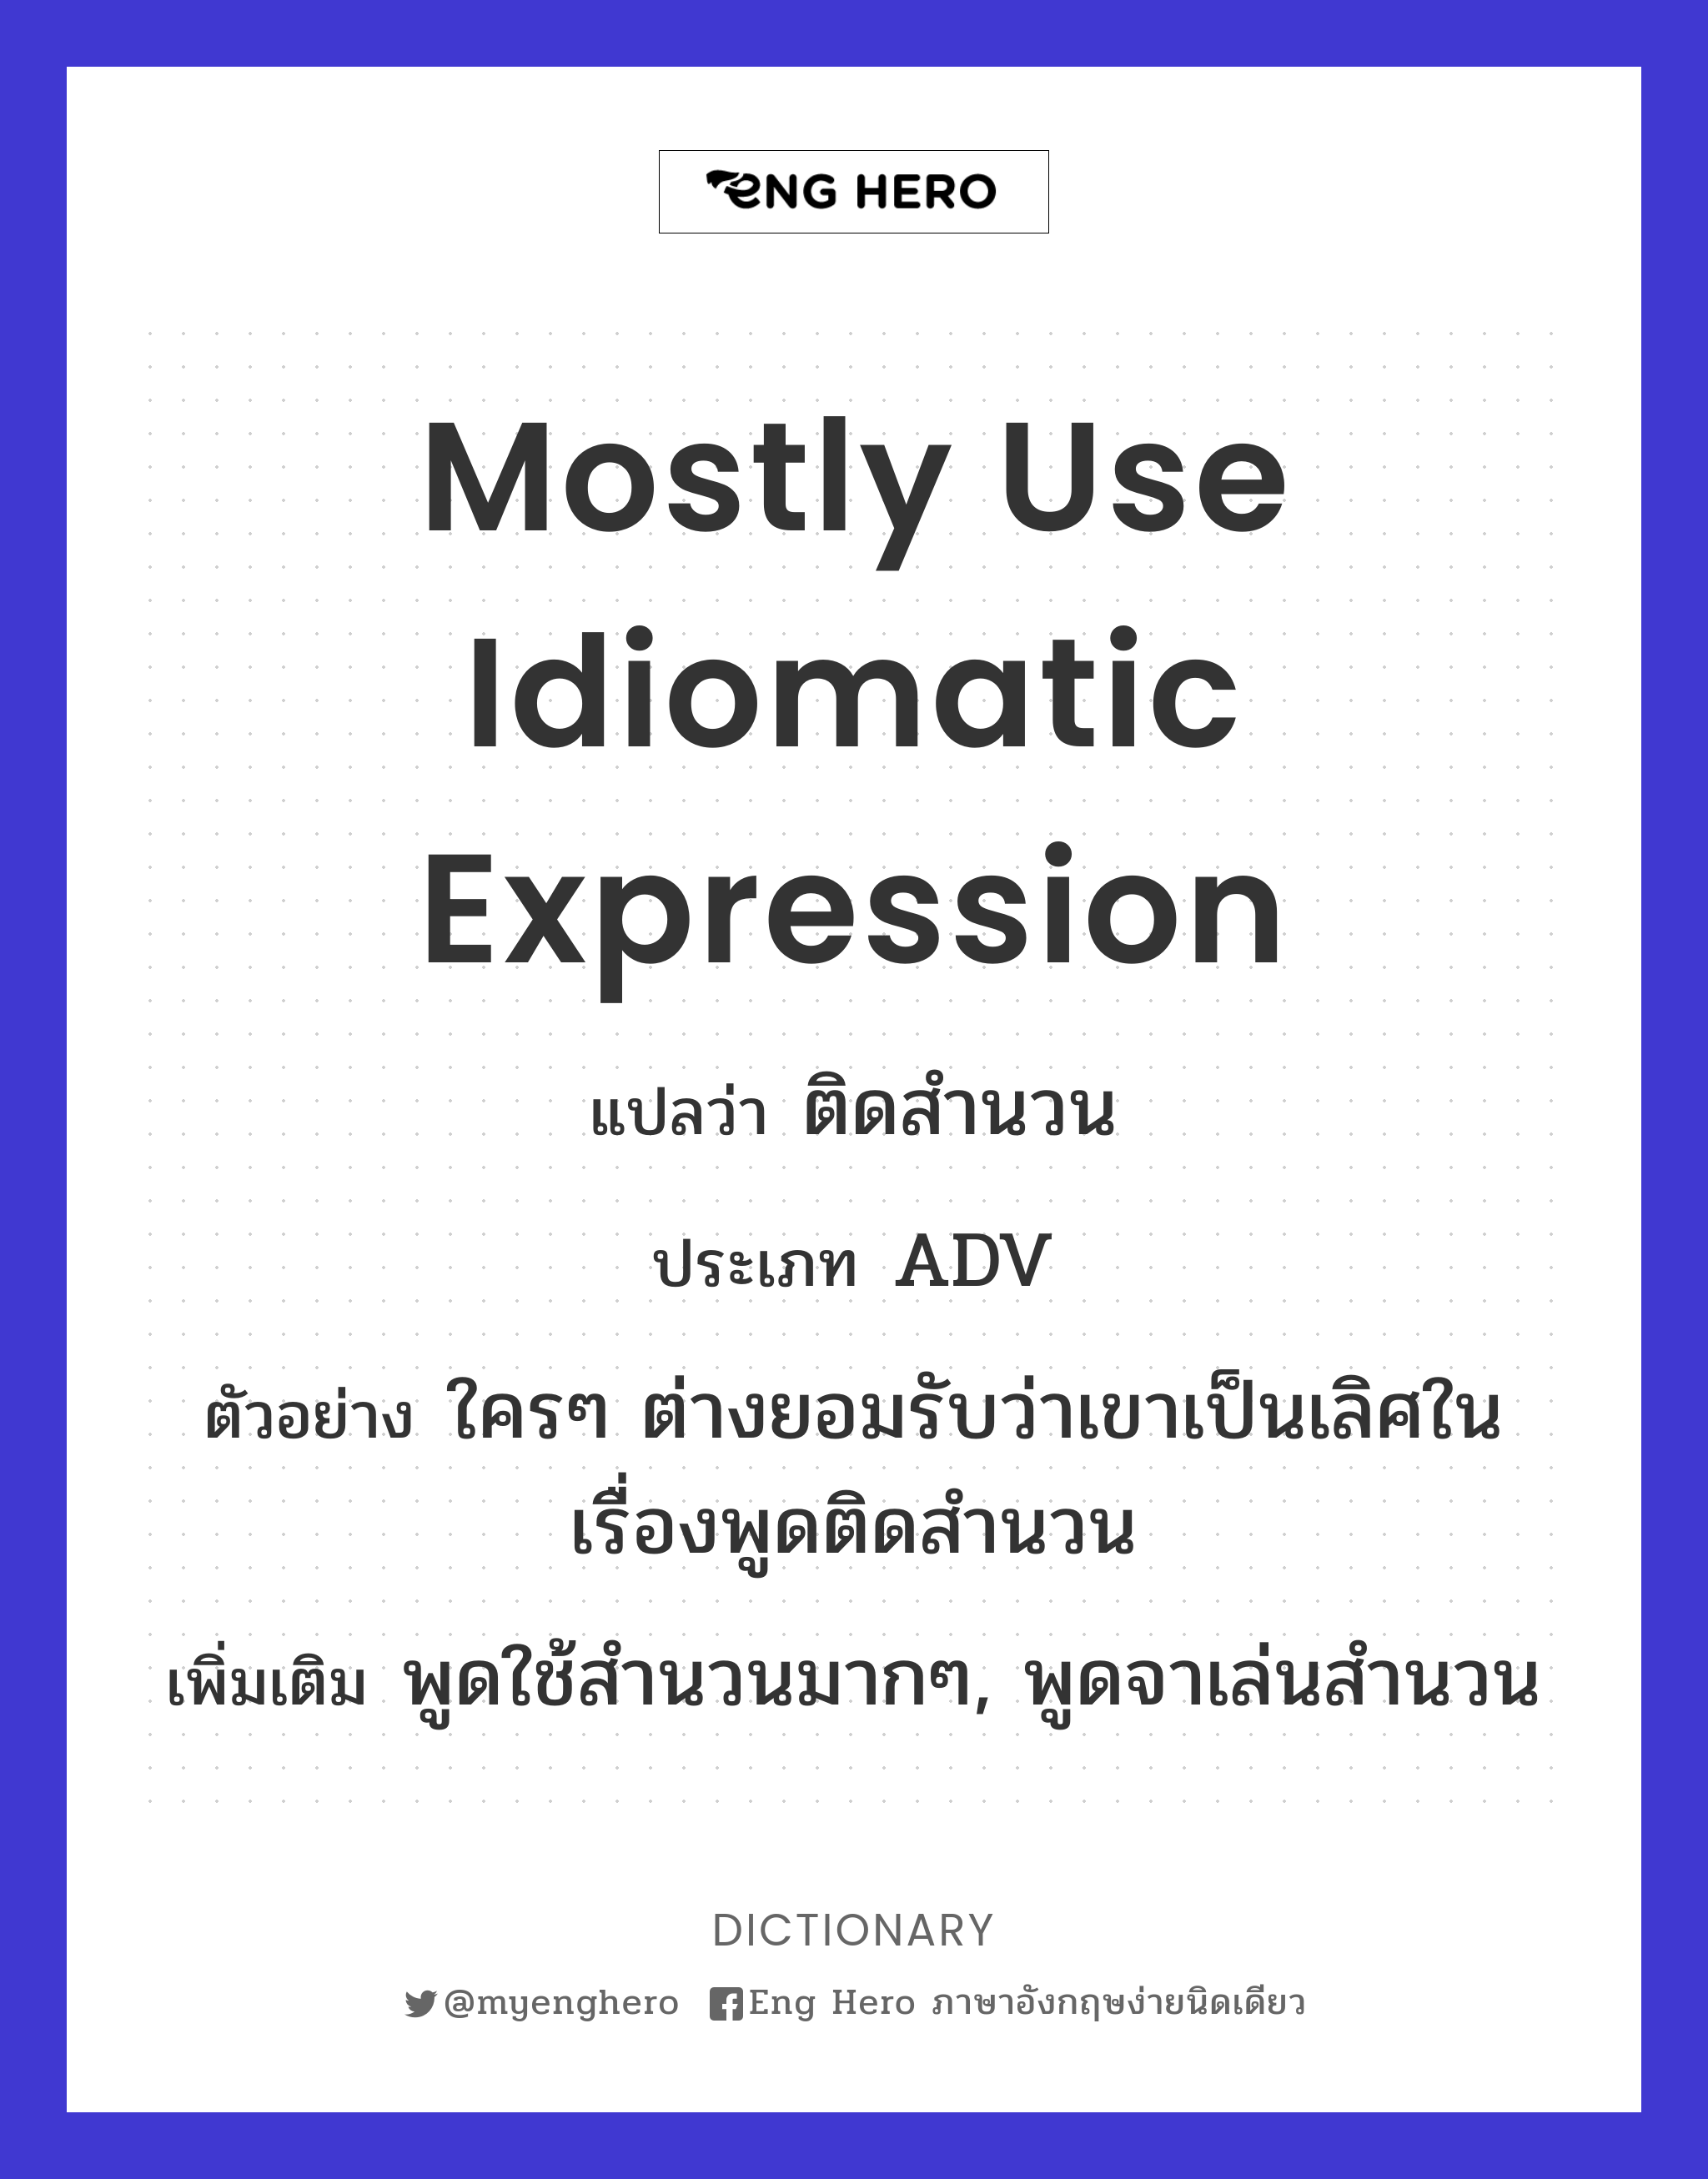 mostly use idiomatic expression